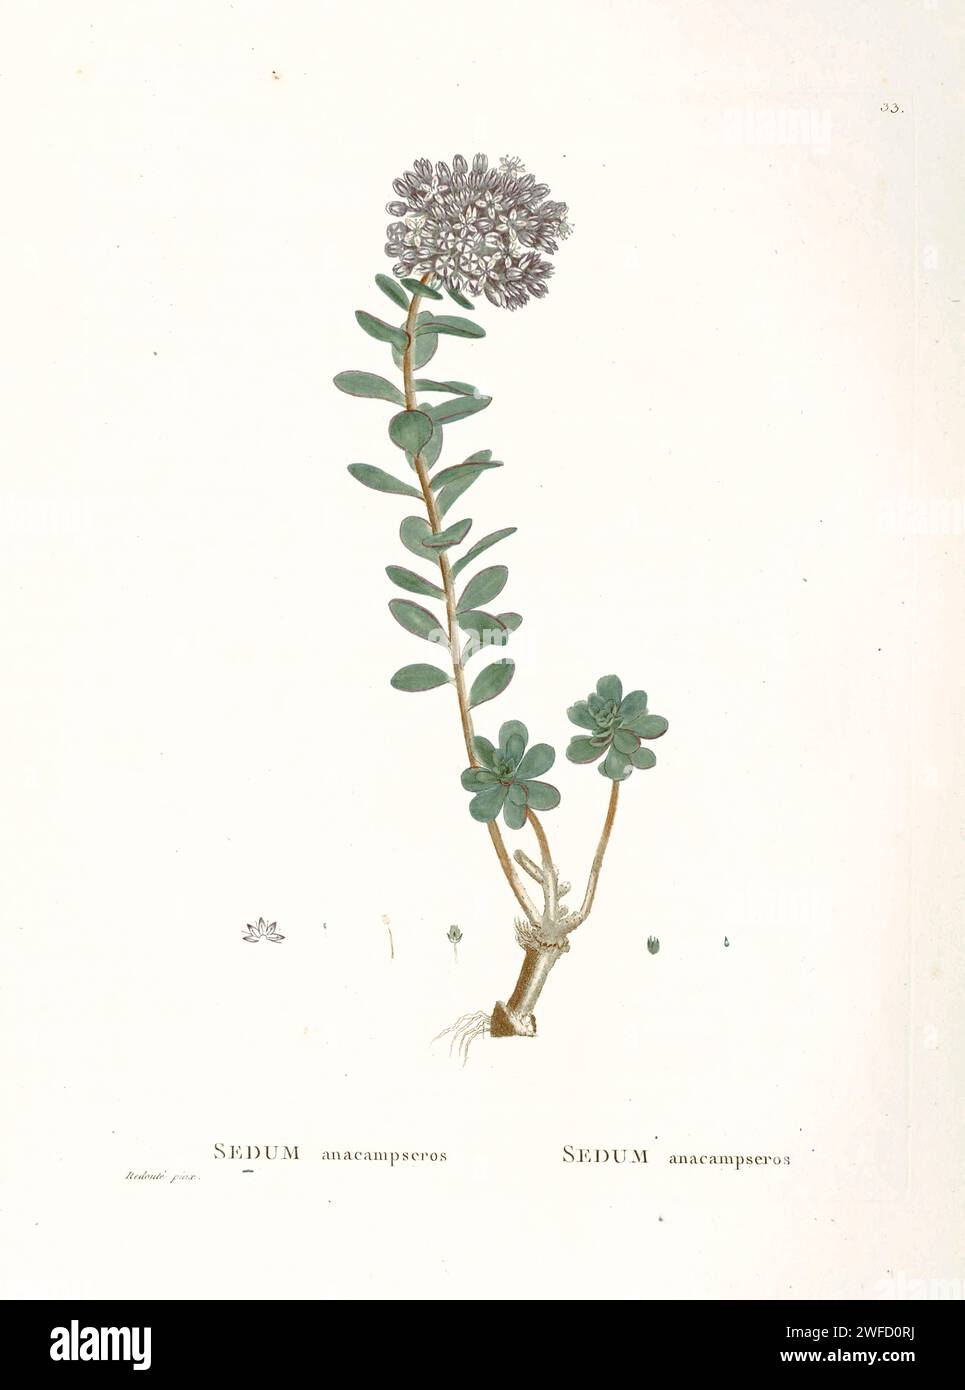 Sedum anacampseros from History of Succulent Plants [Plantarum historia succulentarum / Histoire des plantes grasses] painted by Pierre-Joseph Redouté and described by Augustin Pyramus de Candolle Anacampseros L. is a genus comprising about a hundred species of small perennial succulent plants native to Southern Africa, Ethiopia and Latin America. Stock Photo